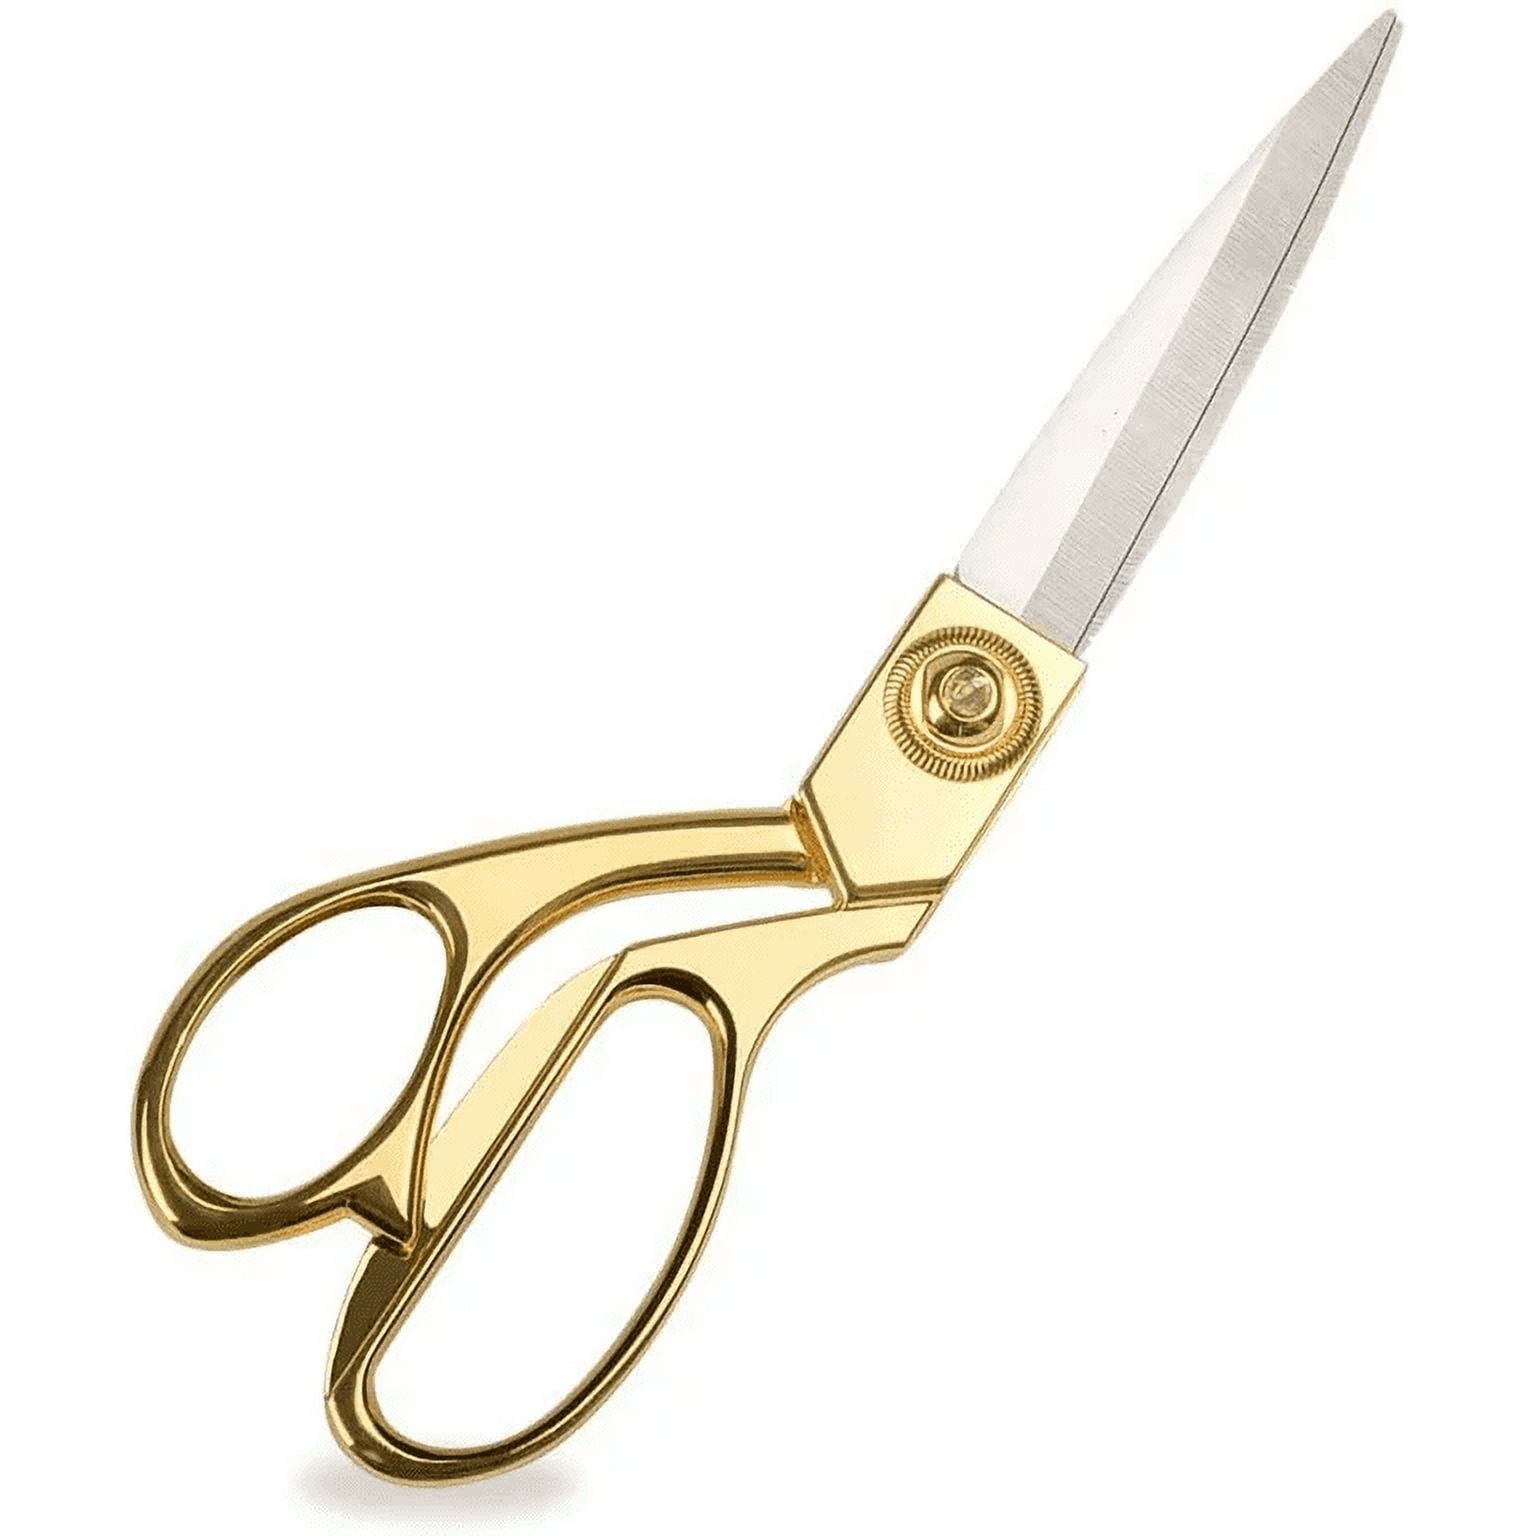 Sharp Sewing Snips Gold Scissors Gift for Embroiderer/sewer